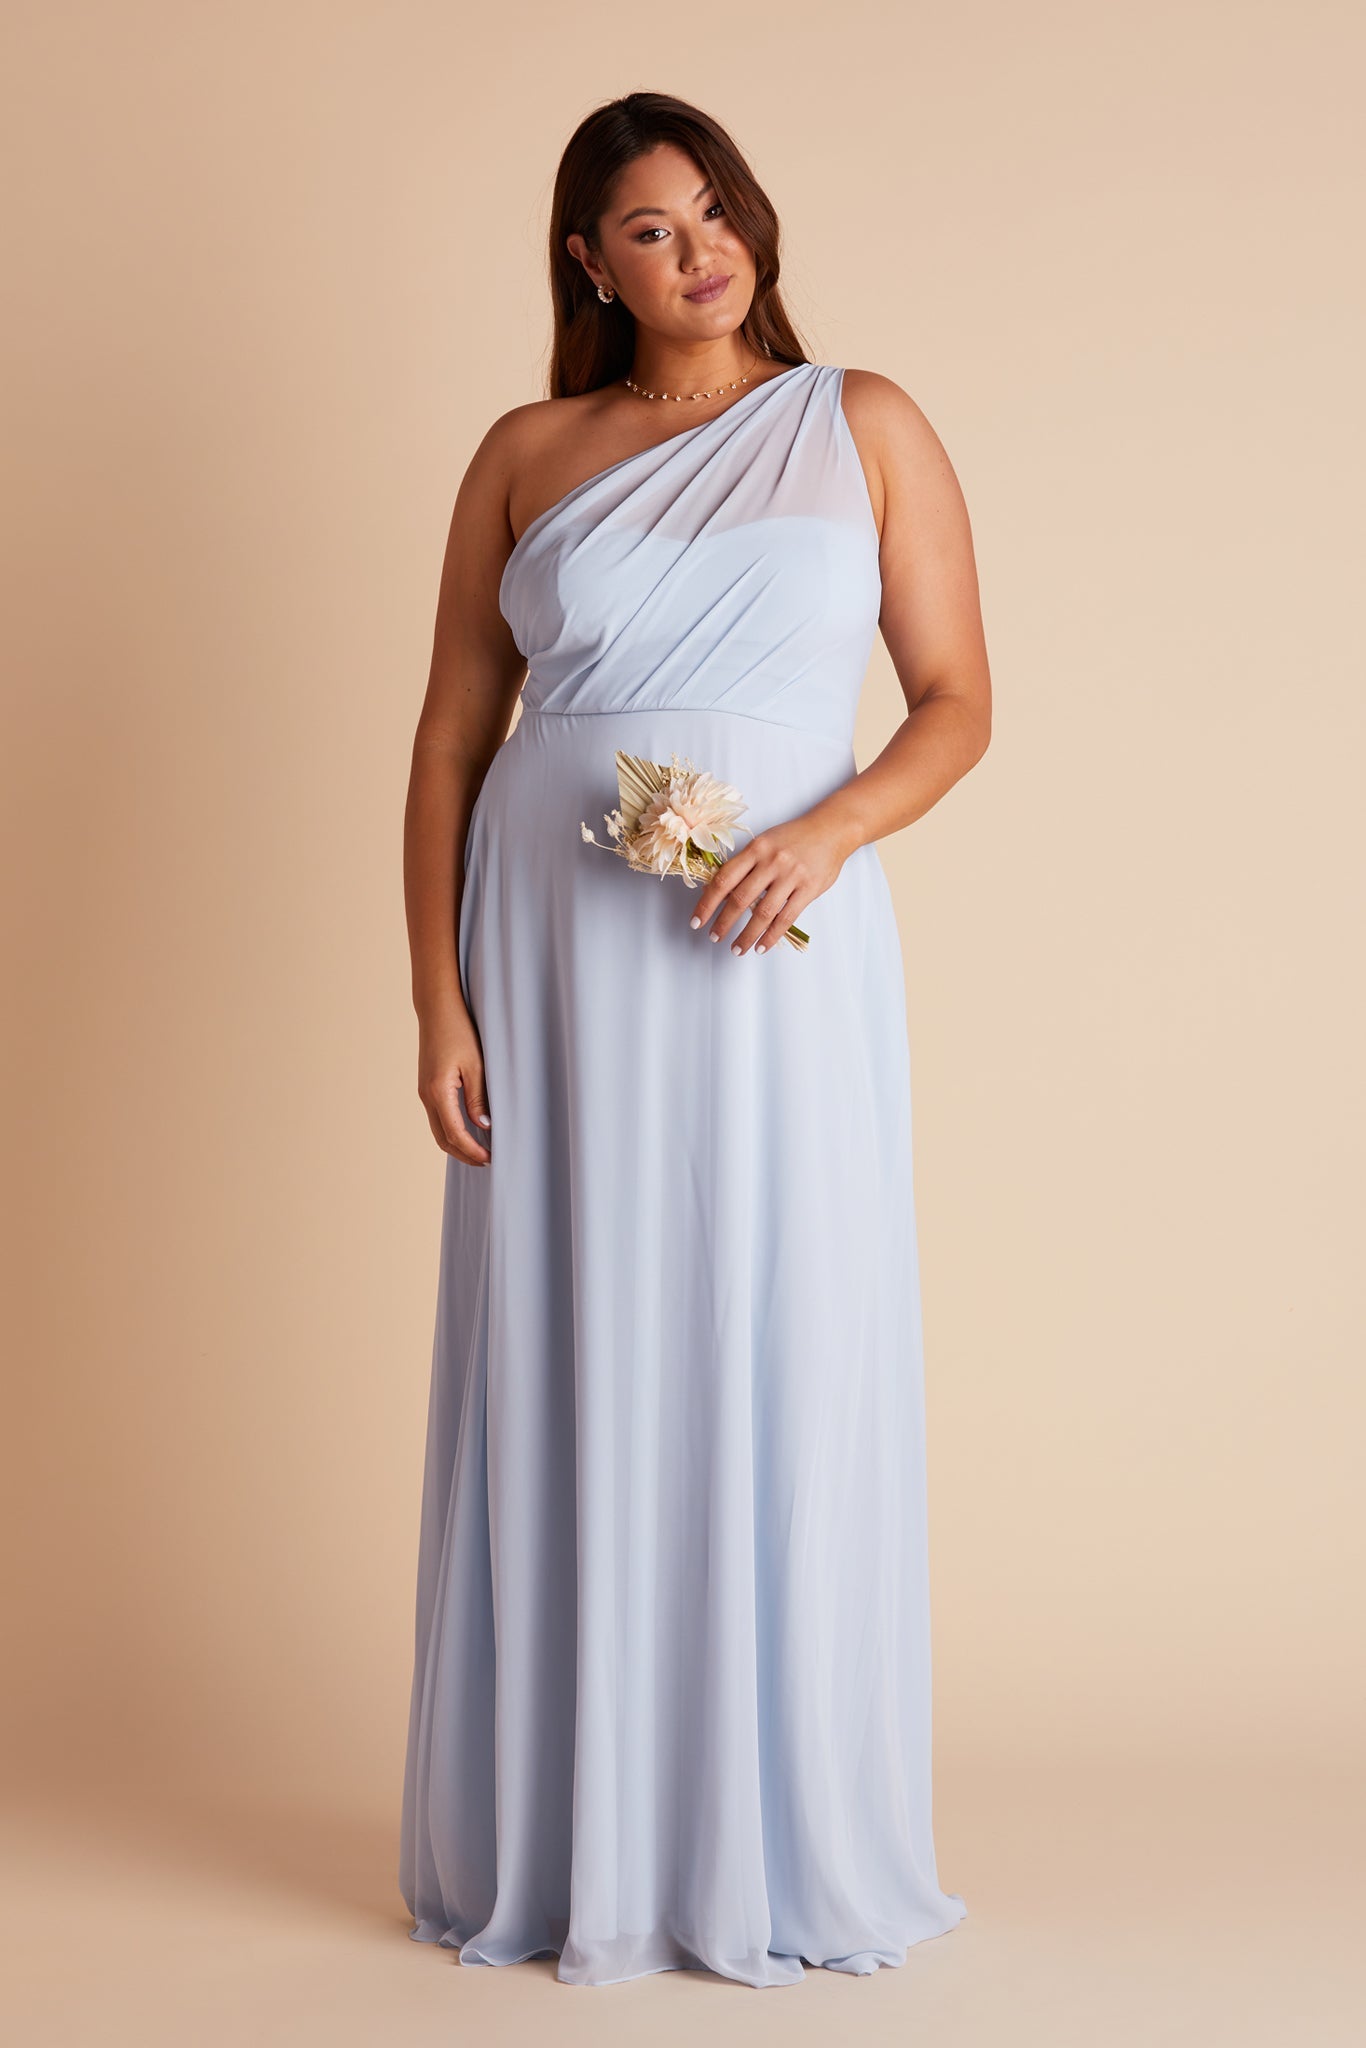 Kira plus size bridesmaids dress in ice blue chiffon by Birdy Grey, front view